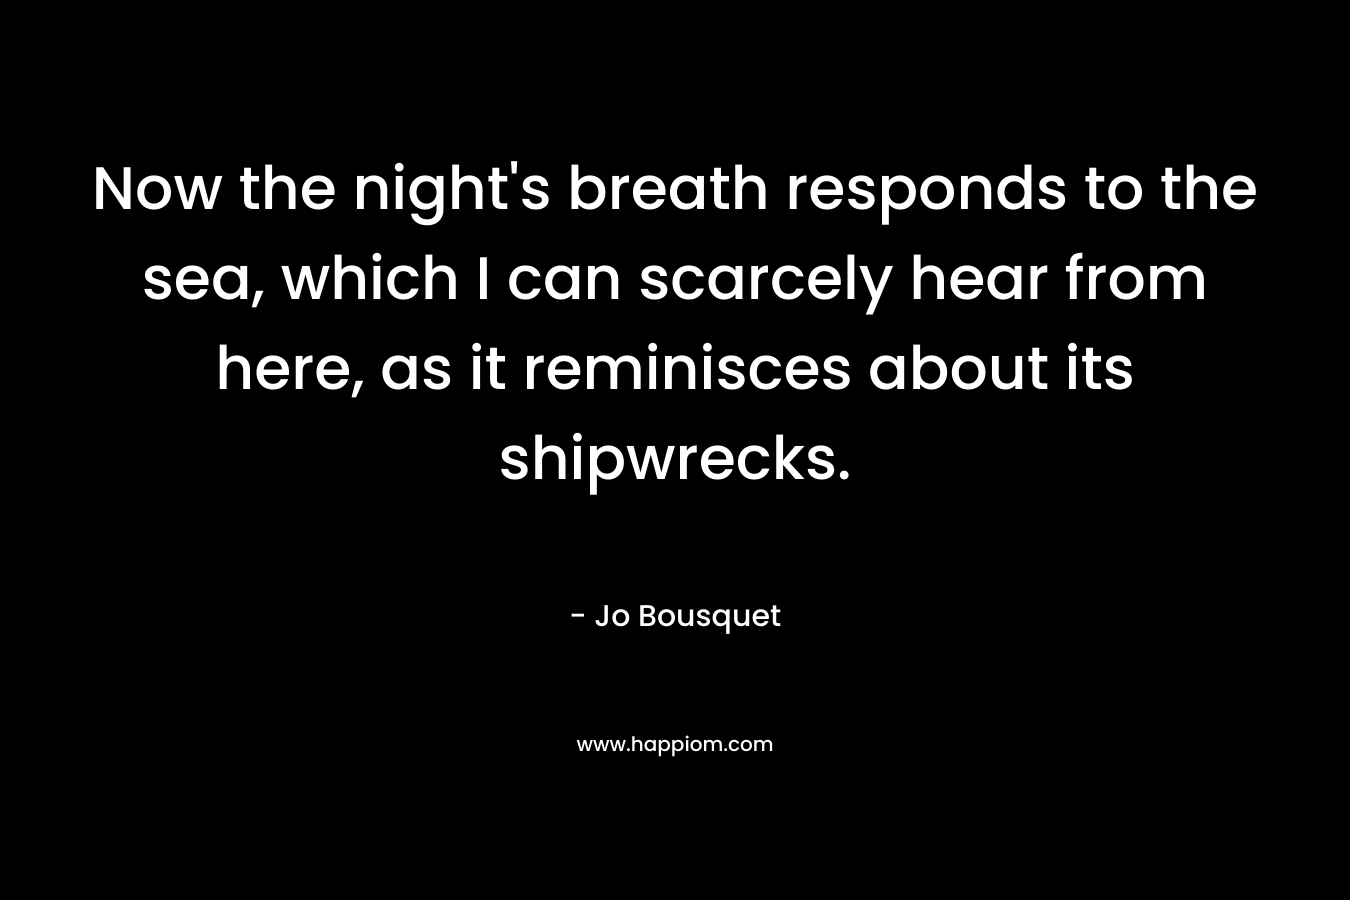 Now the night’s breath responds to the sea, which I can scarcely hear from here, as it reminisces about its shipwrecks. – Jo Bousquet